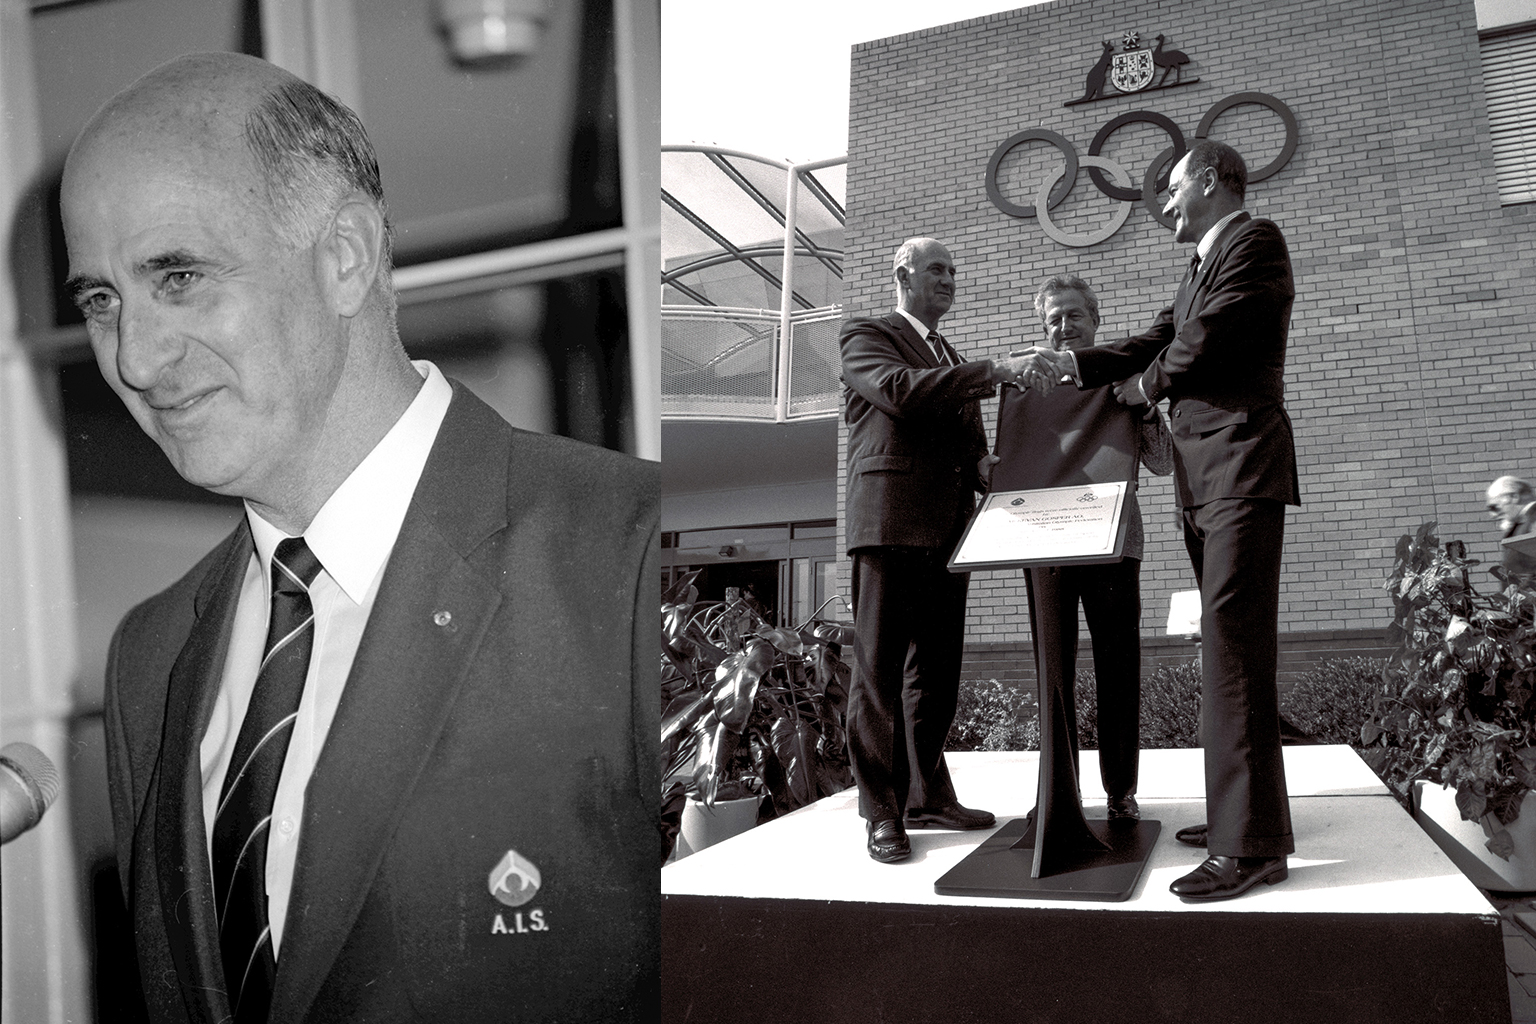 Image shows John Bloomfield left smiling and right shows an unveiling Of Olympic Rings On Administration Building Prof. John Bloomfield AIS Chair, Phil Coles, Kevan Gosper